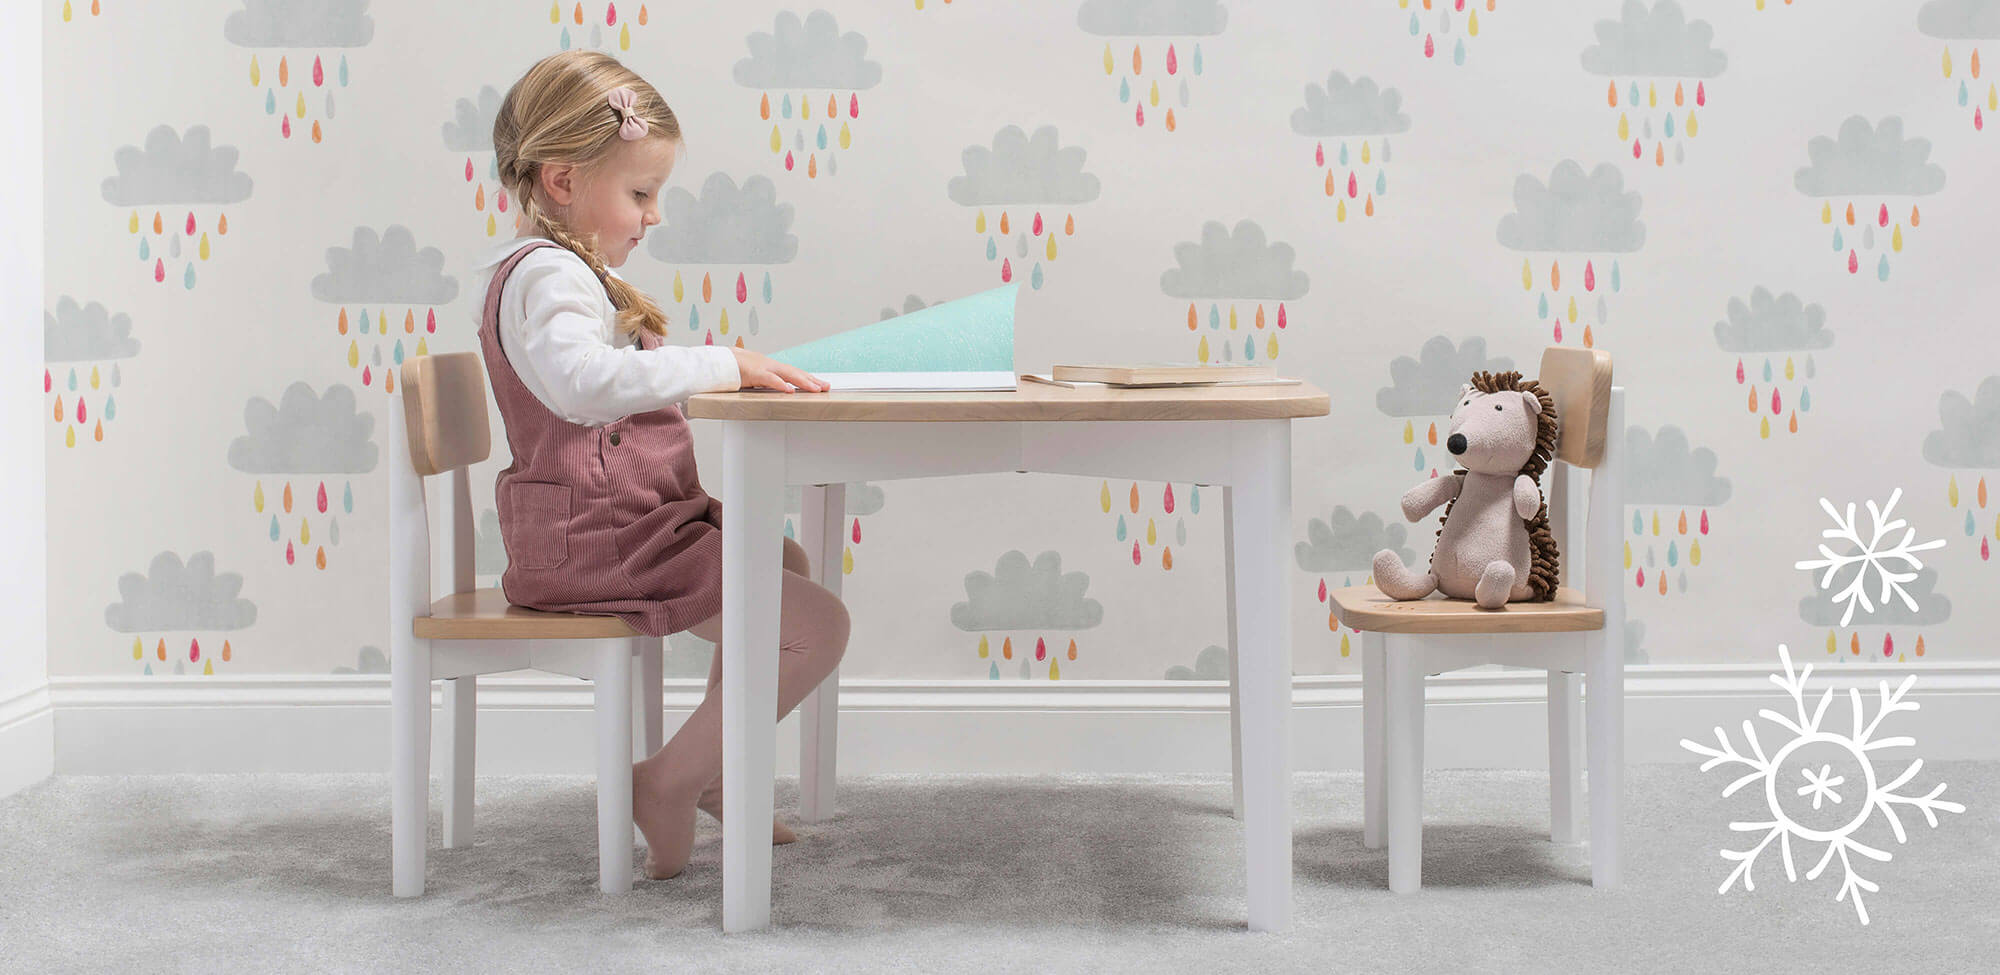 Girl using Tidy Table & Chairs set